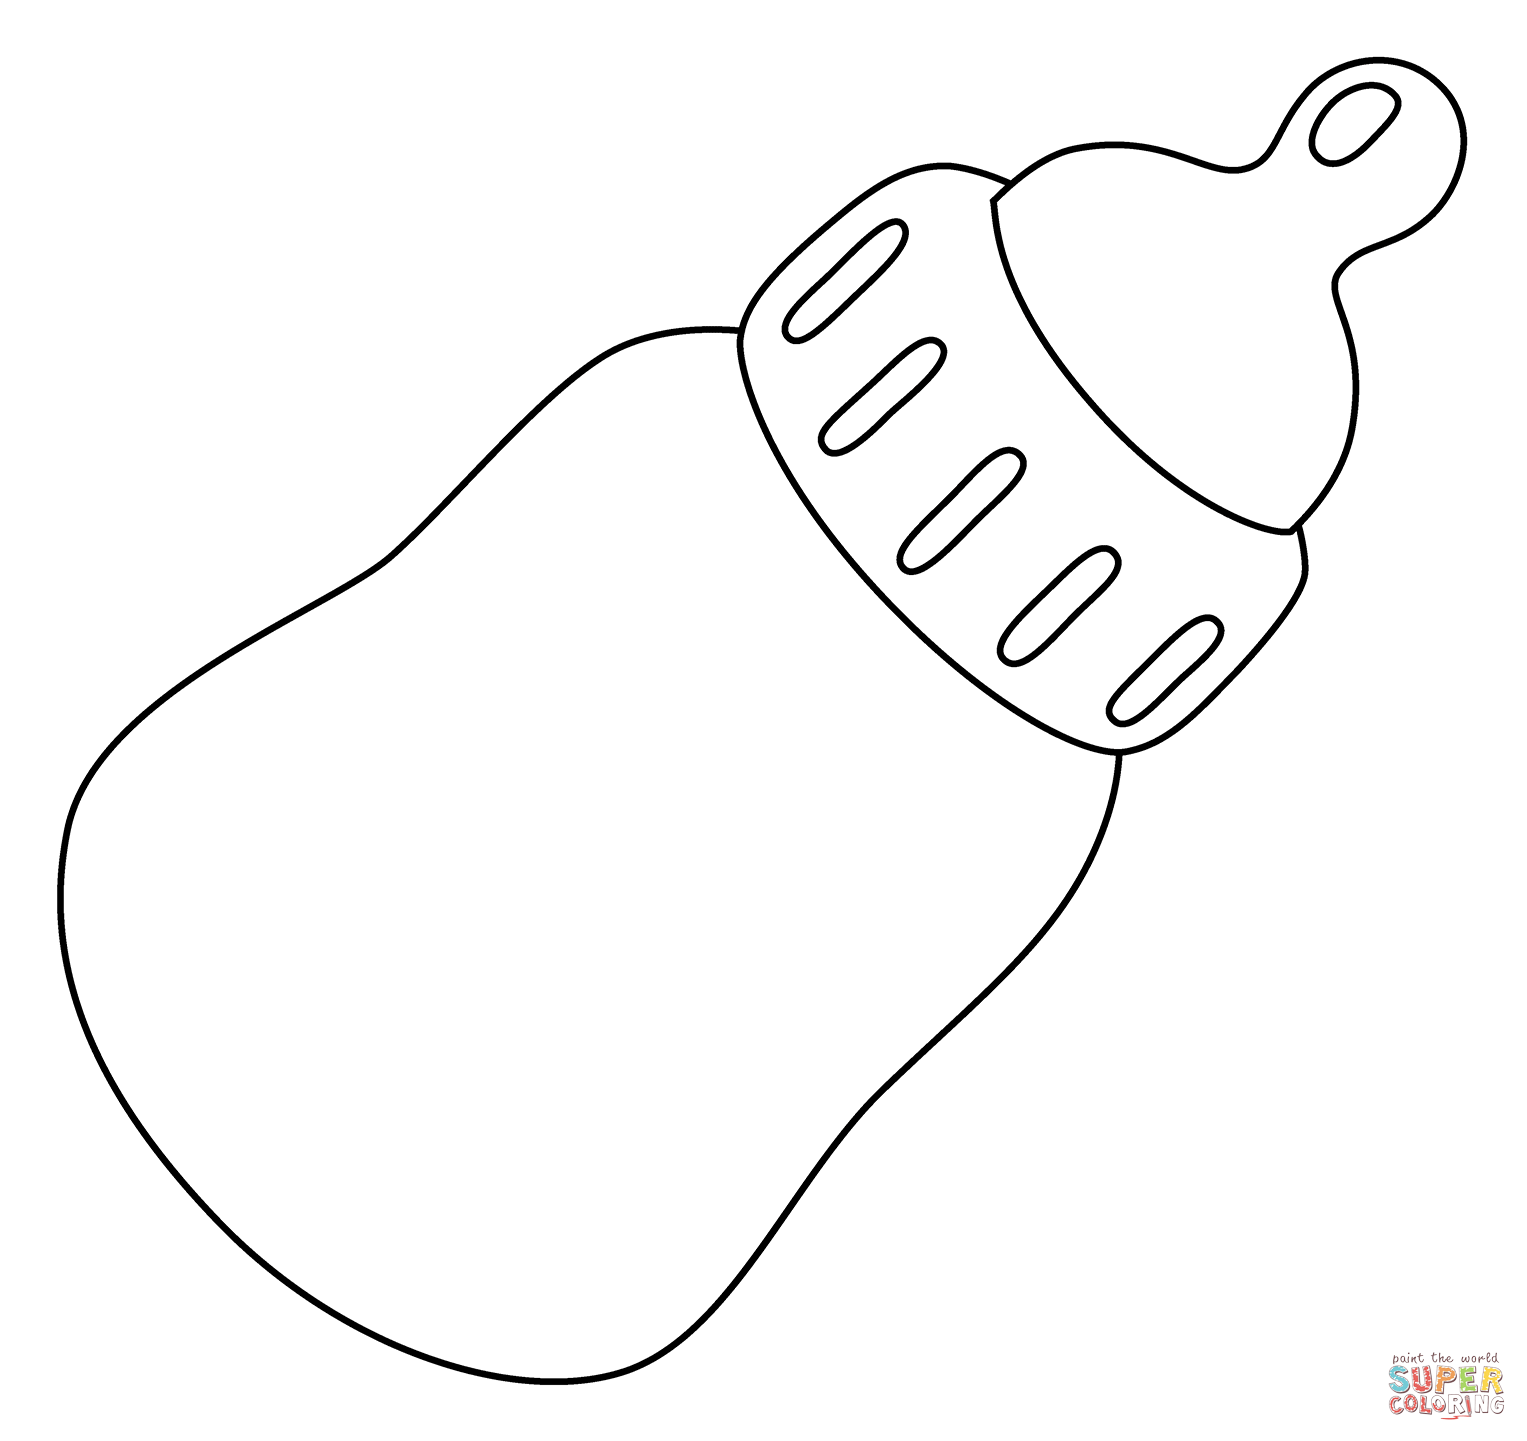 Baby bottle emoji coloring page free printable coloring pages